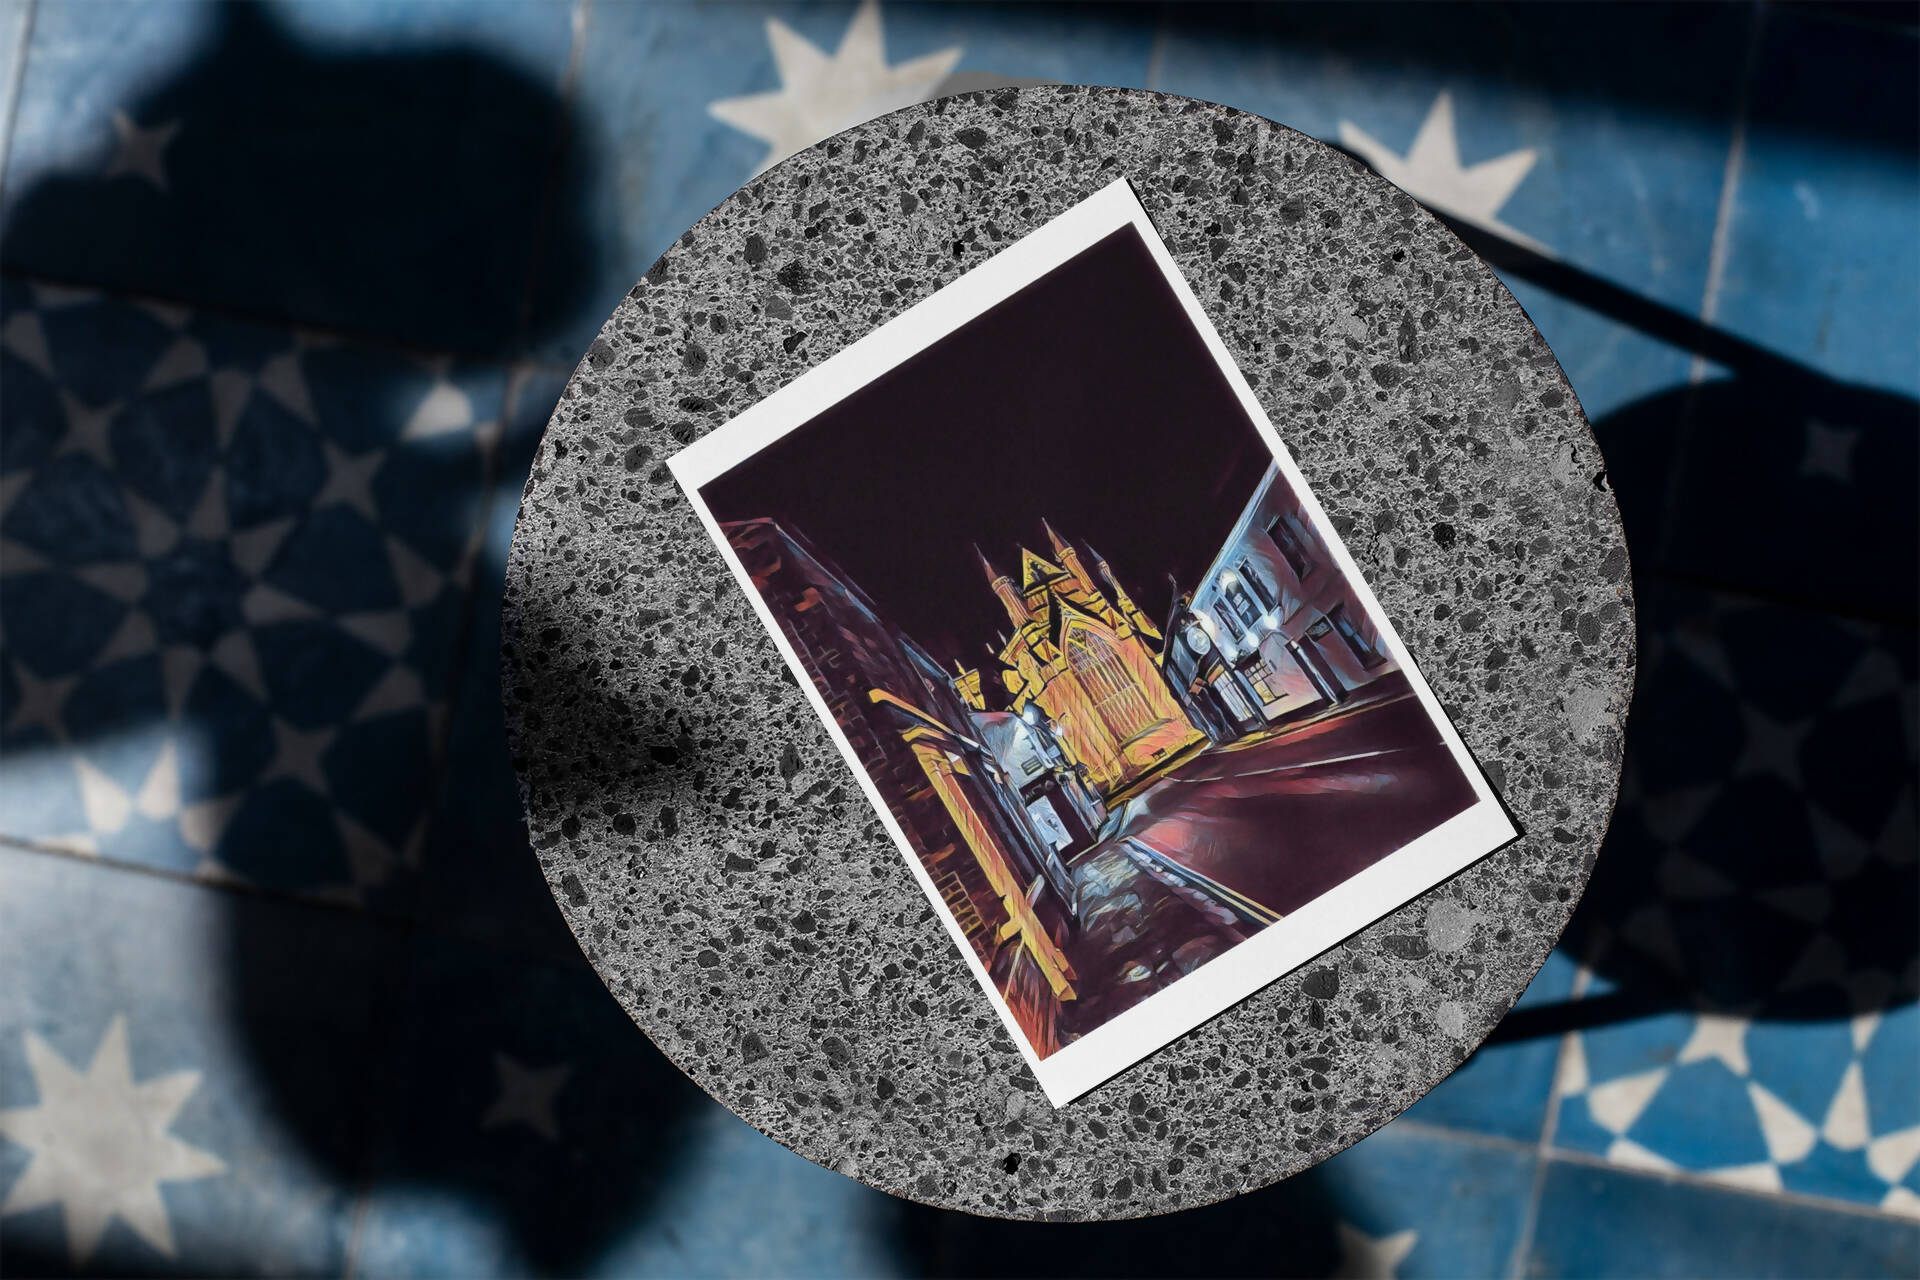 Beautiful Beverley Minster at Night Art Print in A3 Framed with Mount